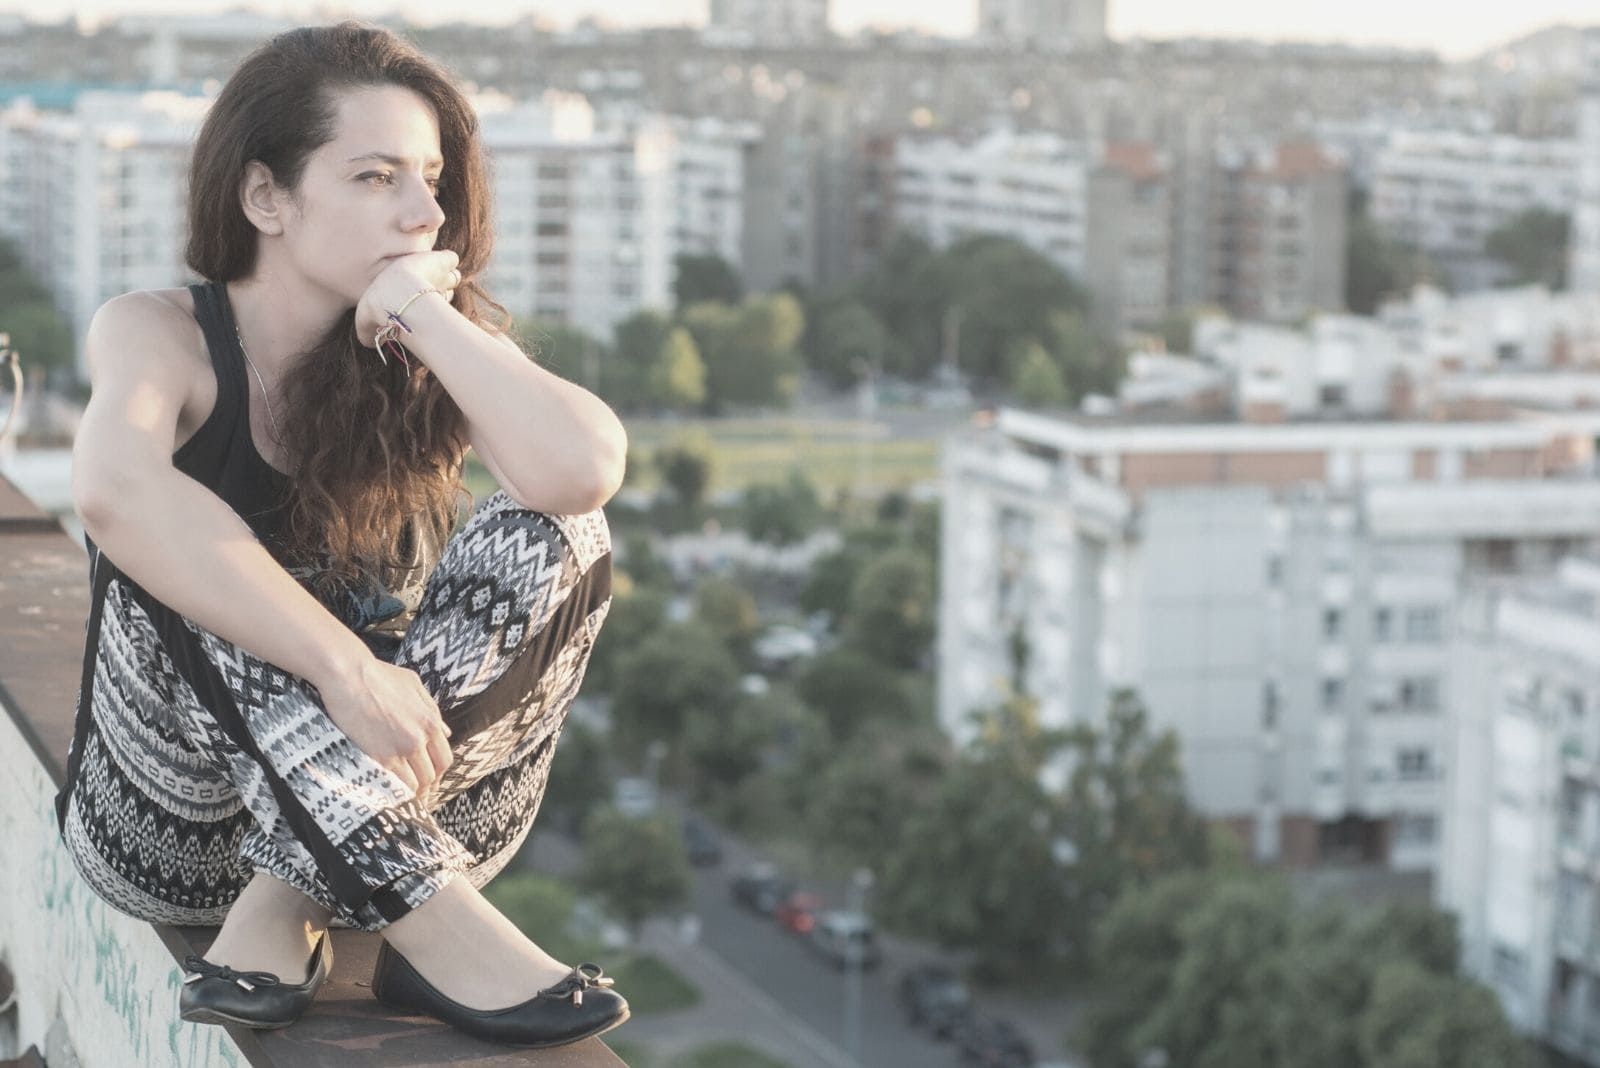 woman sitting on the ledge on top of the building thinking deeply